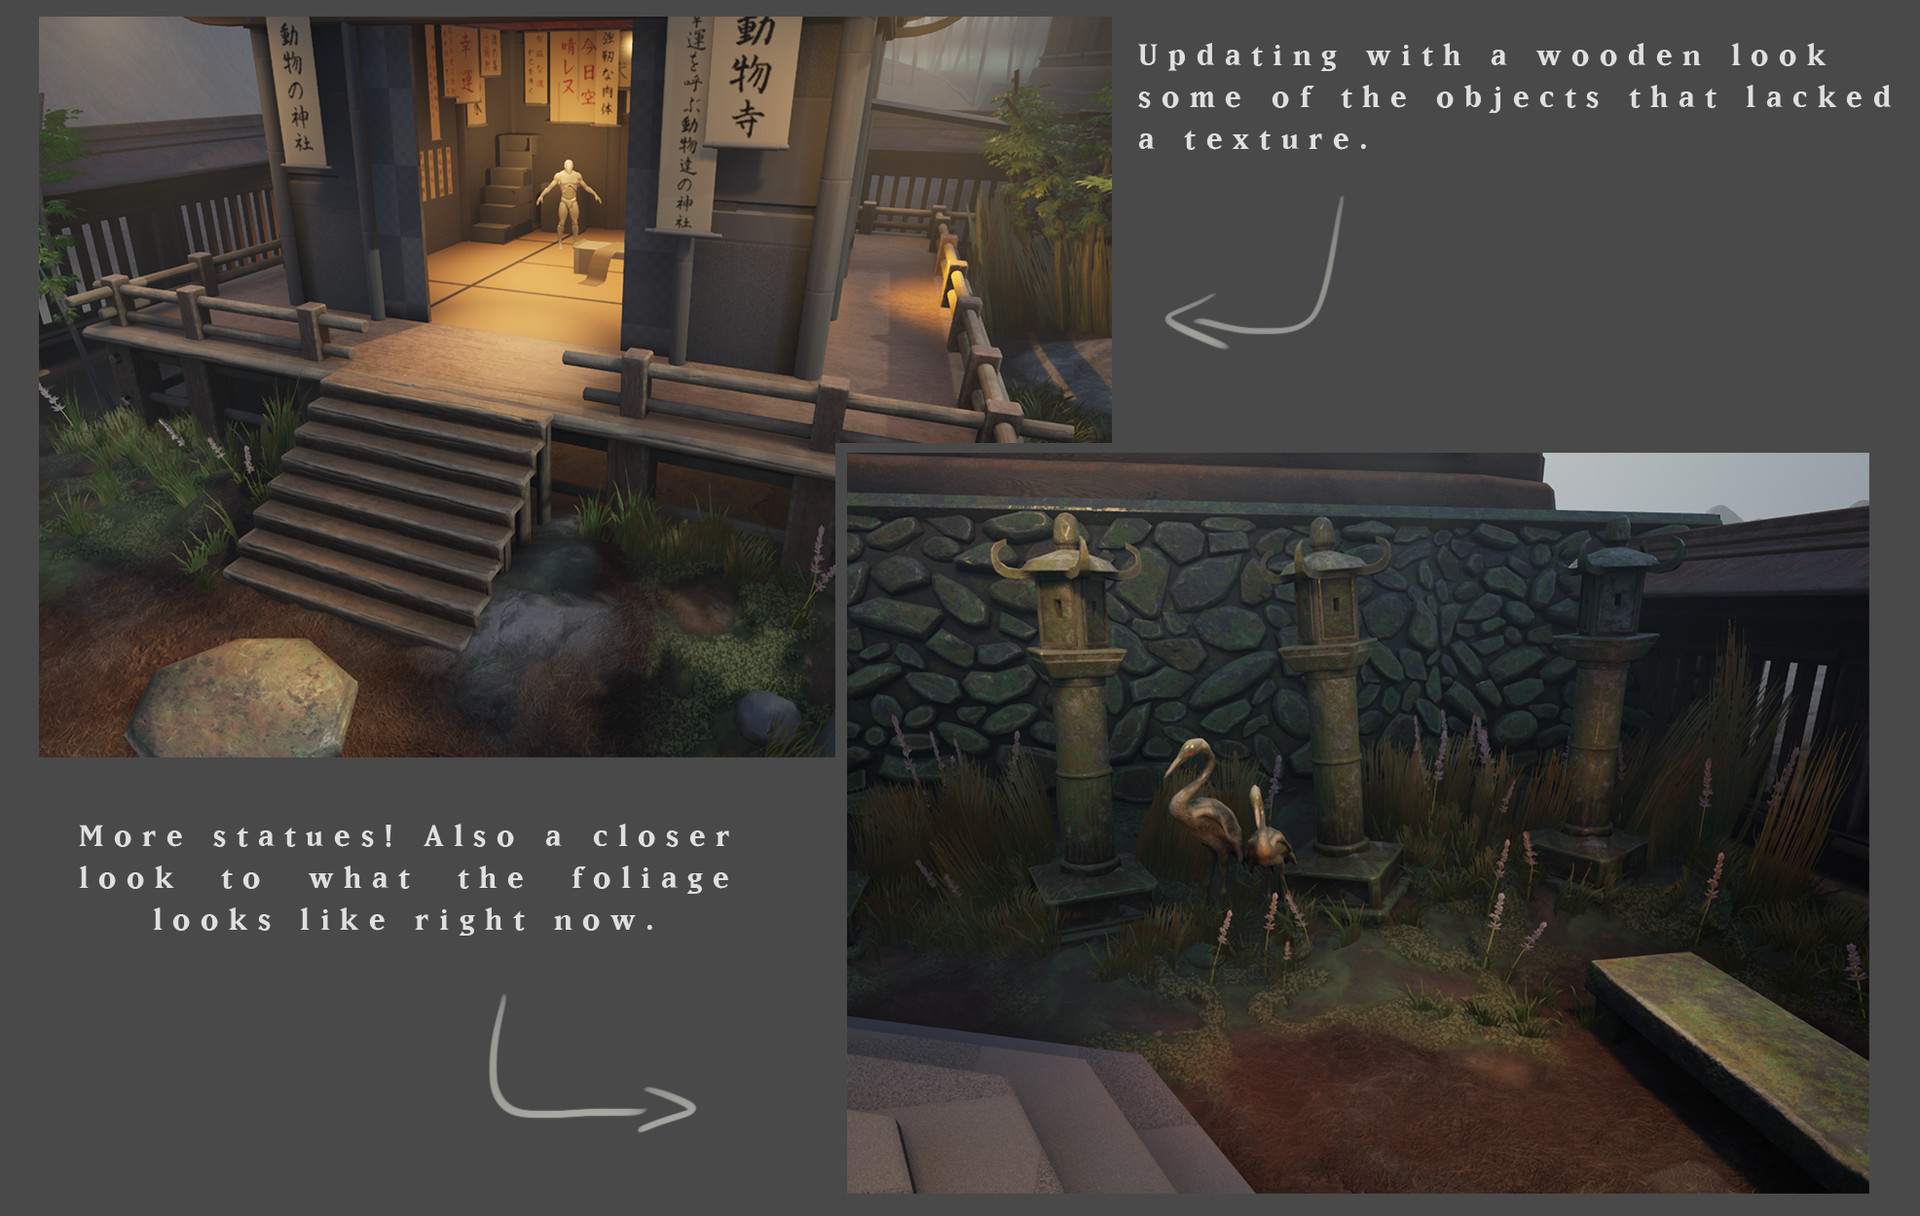 Two Unreal 4 screenshot put together with some annotations. First one is a look at the support and stairs of the calligraphers hut. Text next to it reads “Updating with a wooden look some of the objects that lacked a texture.” Next screenshot shows bunch of stone lanterns. They are surrounded by statues, grass and flowers. Text reads “More statues! Also a closer look to what the foliage looks like right now.”.